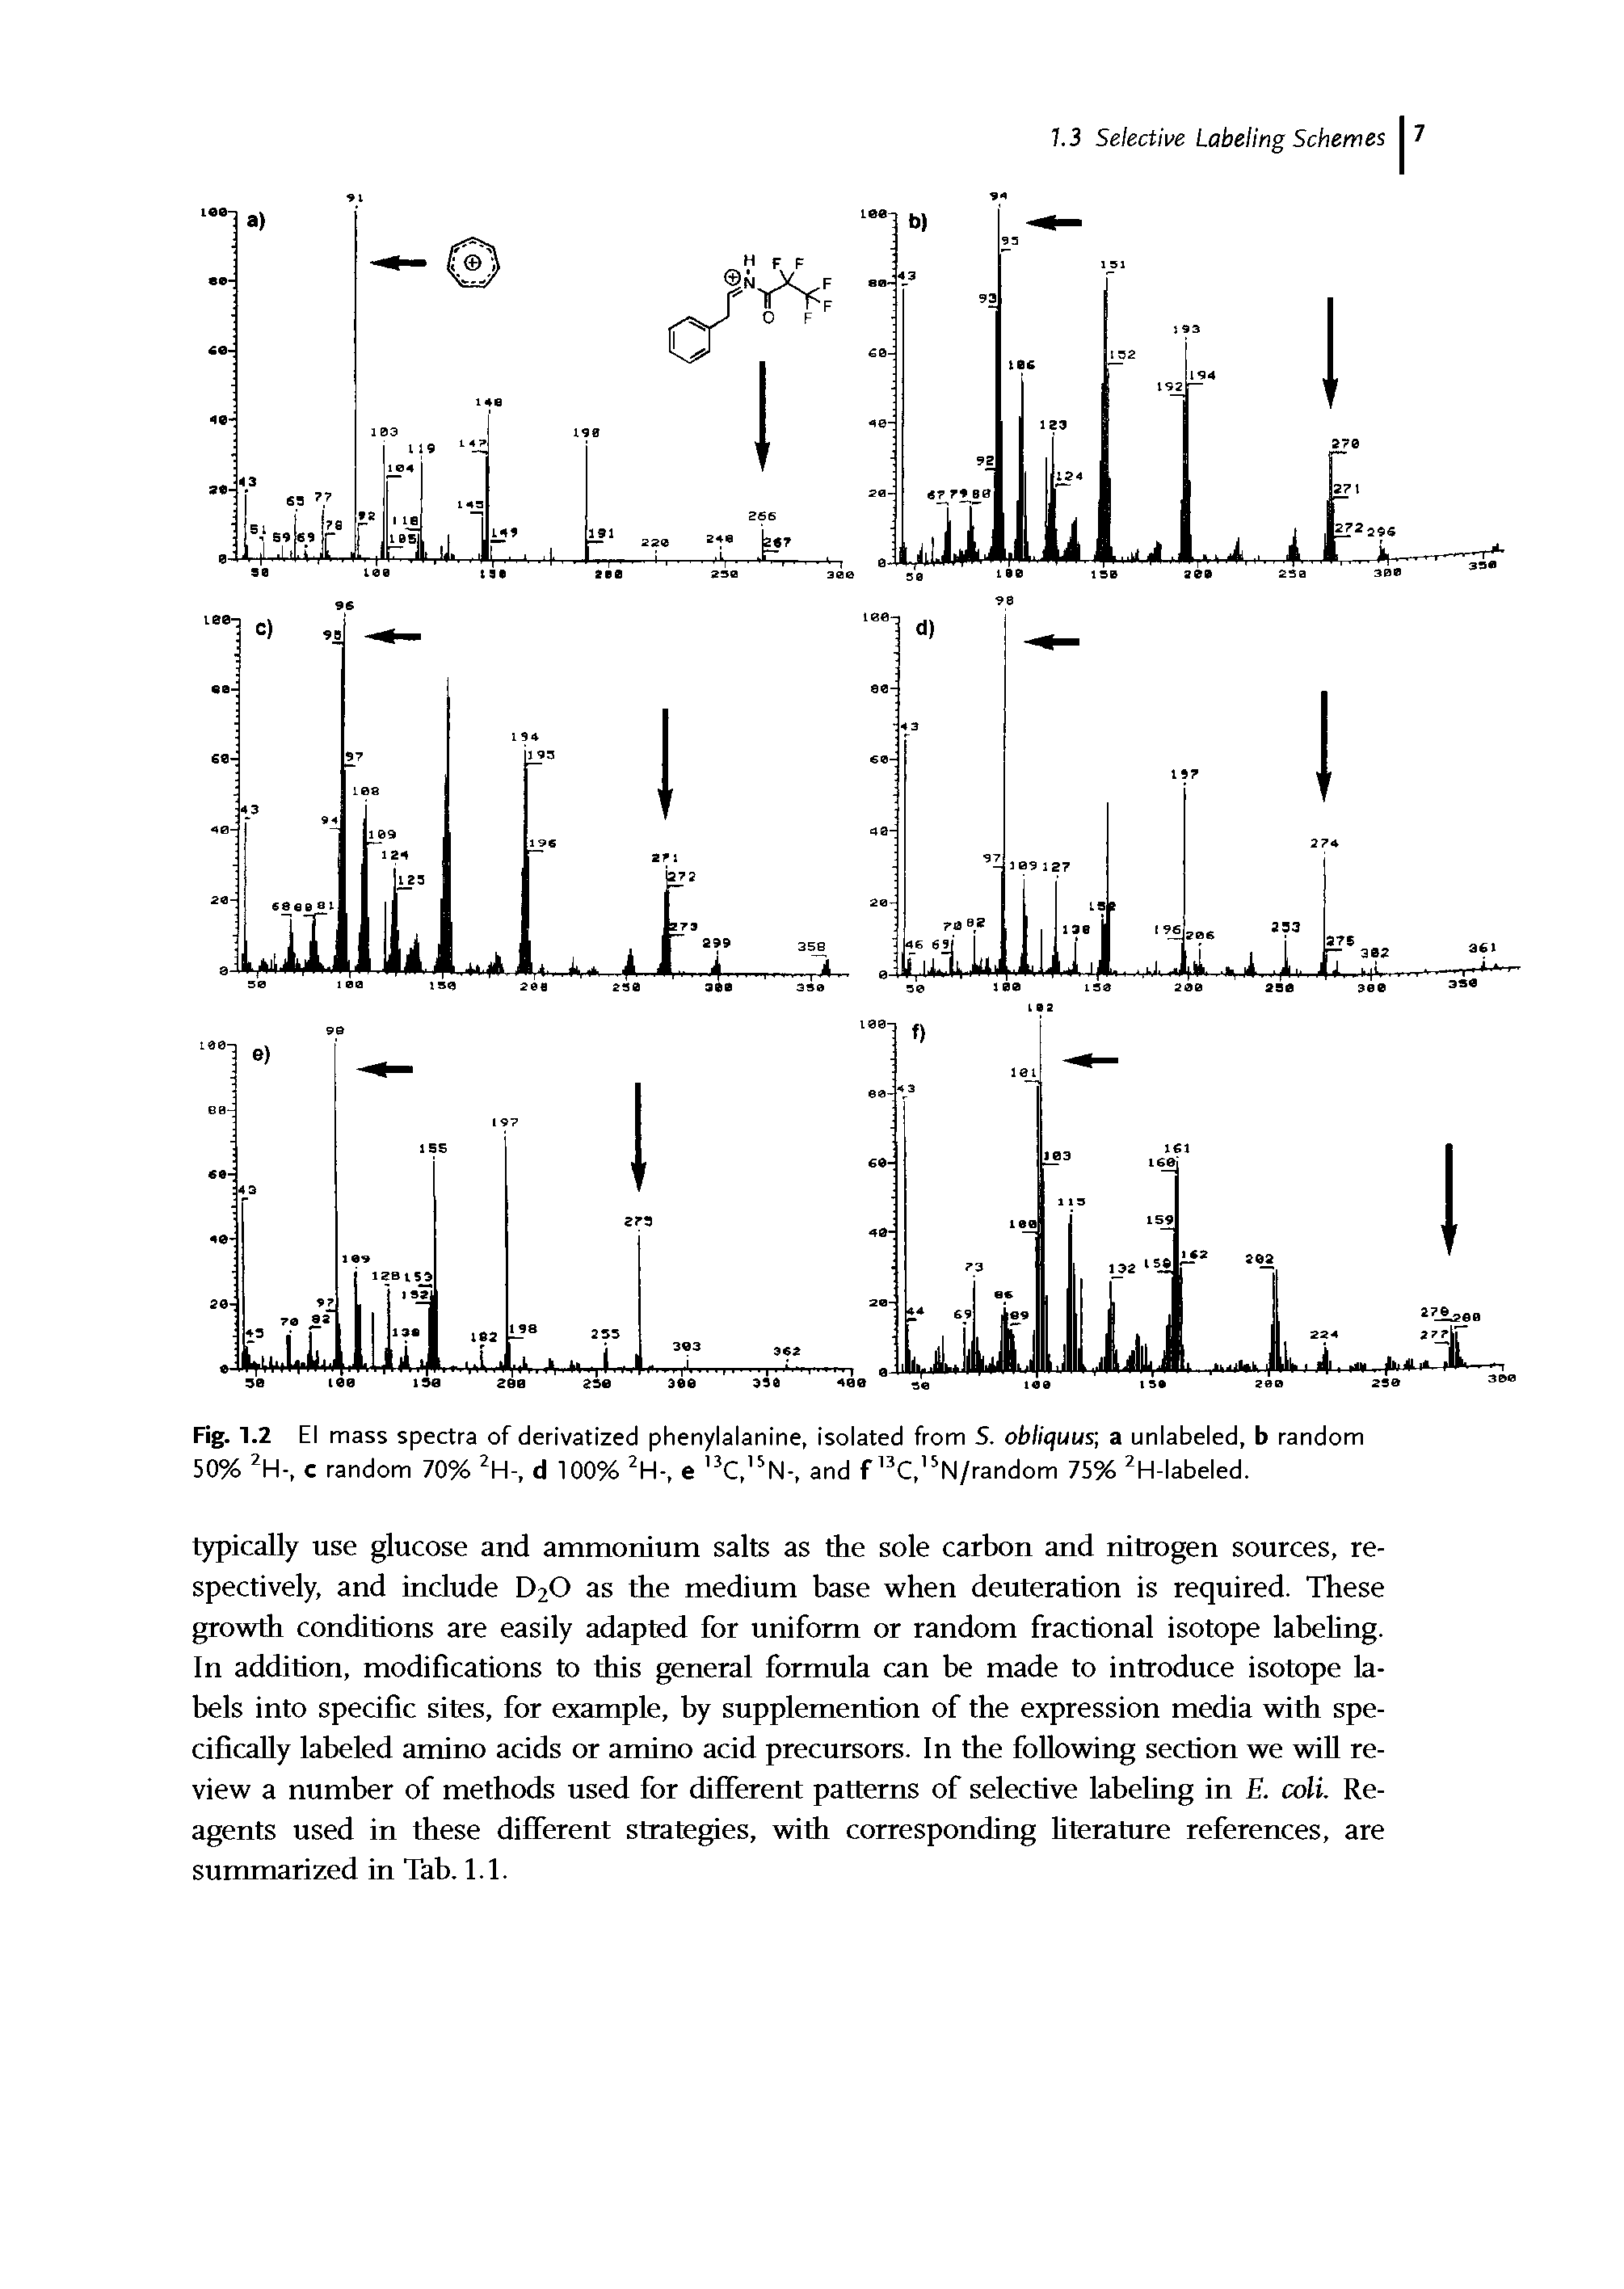 Fig. 1.2 El mass spectra of derivatized phenylalanine, isolated from 5. obliquus a unlabeled, b random 50% 2H-, c random 70% 2H-, d 100% 2H-, e 3C, 5N-, and f 13C, 5N/random 75% 2H-labeled.